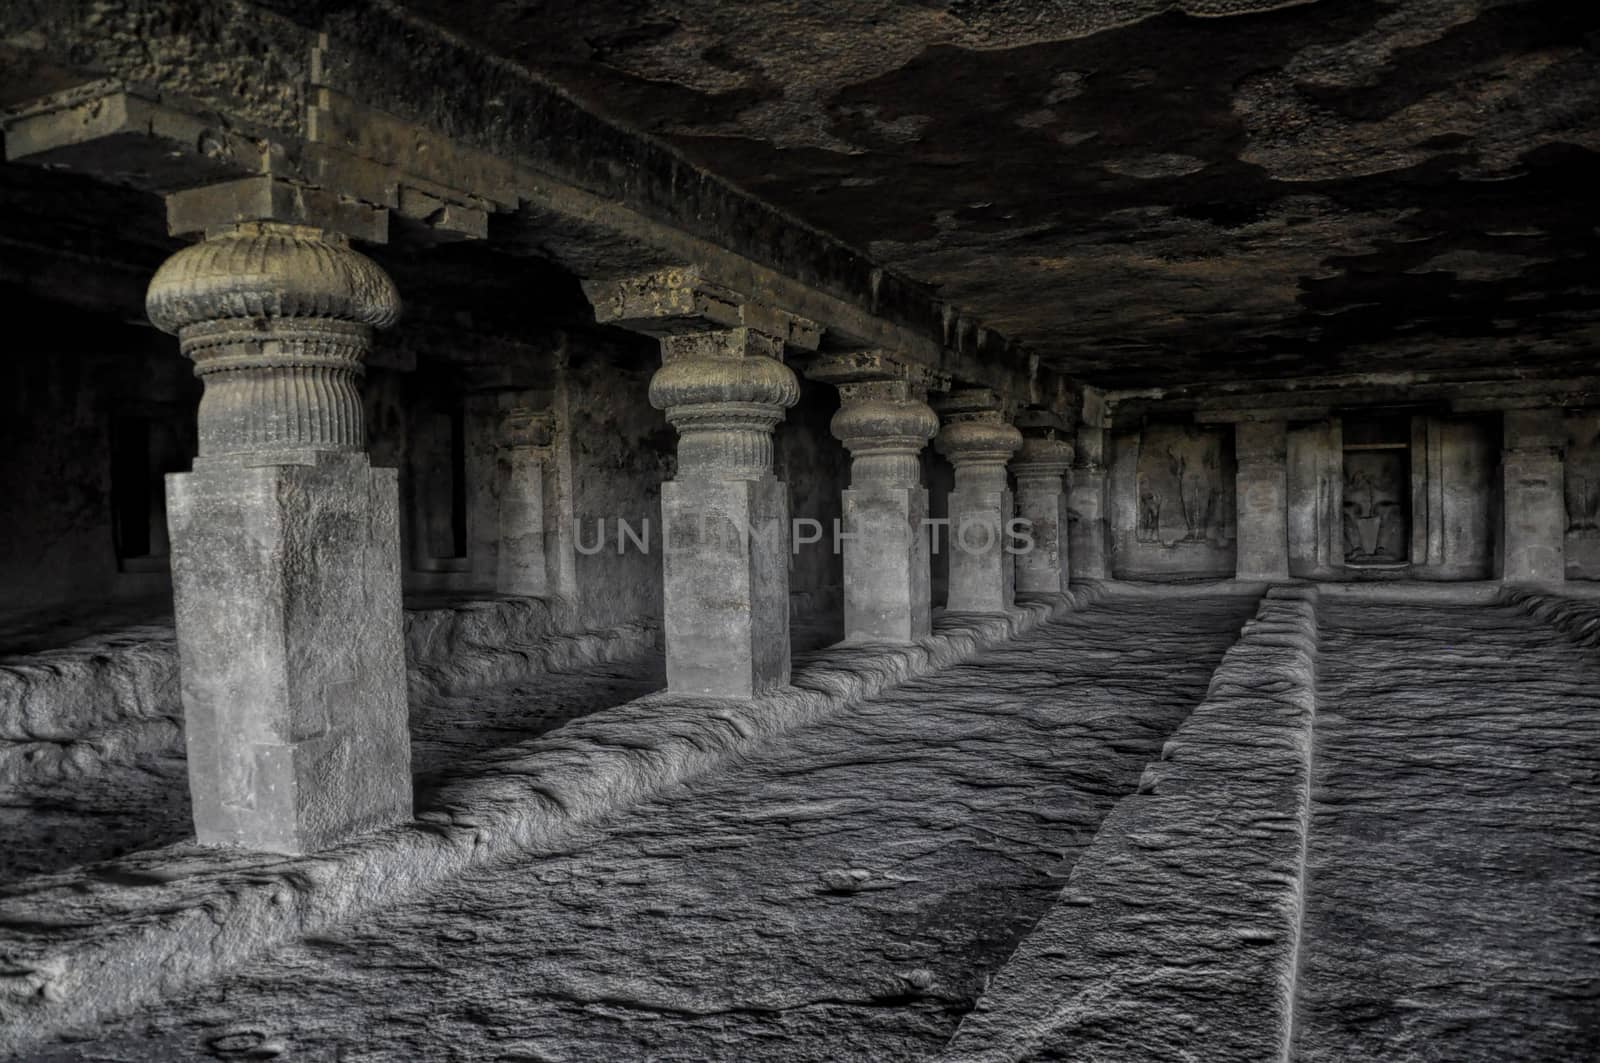 Inside of Ellora caves, unseco archeological site in India